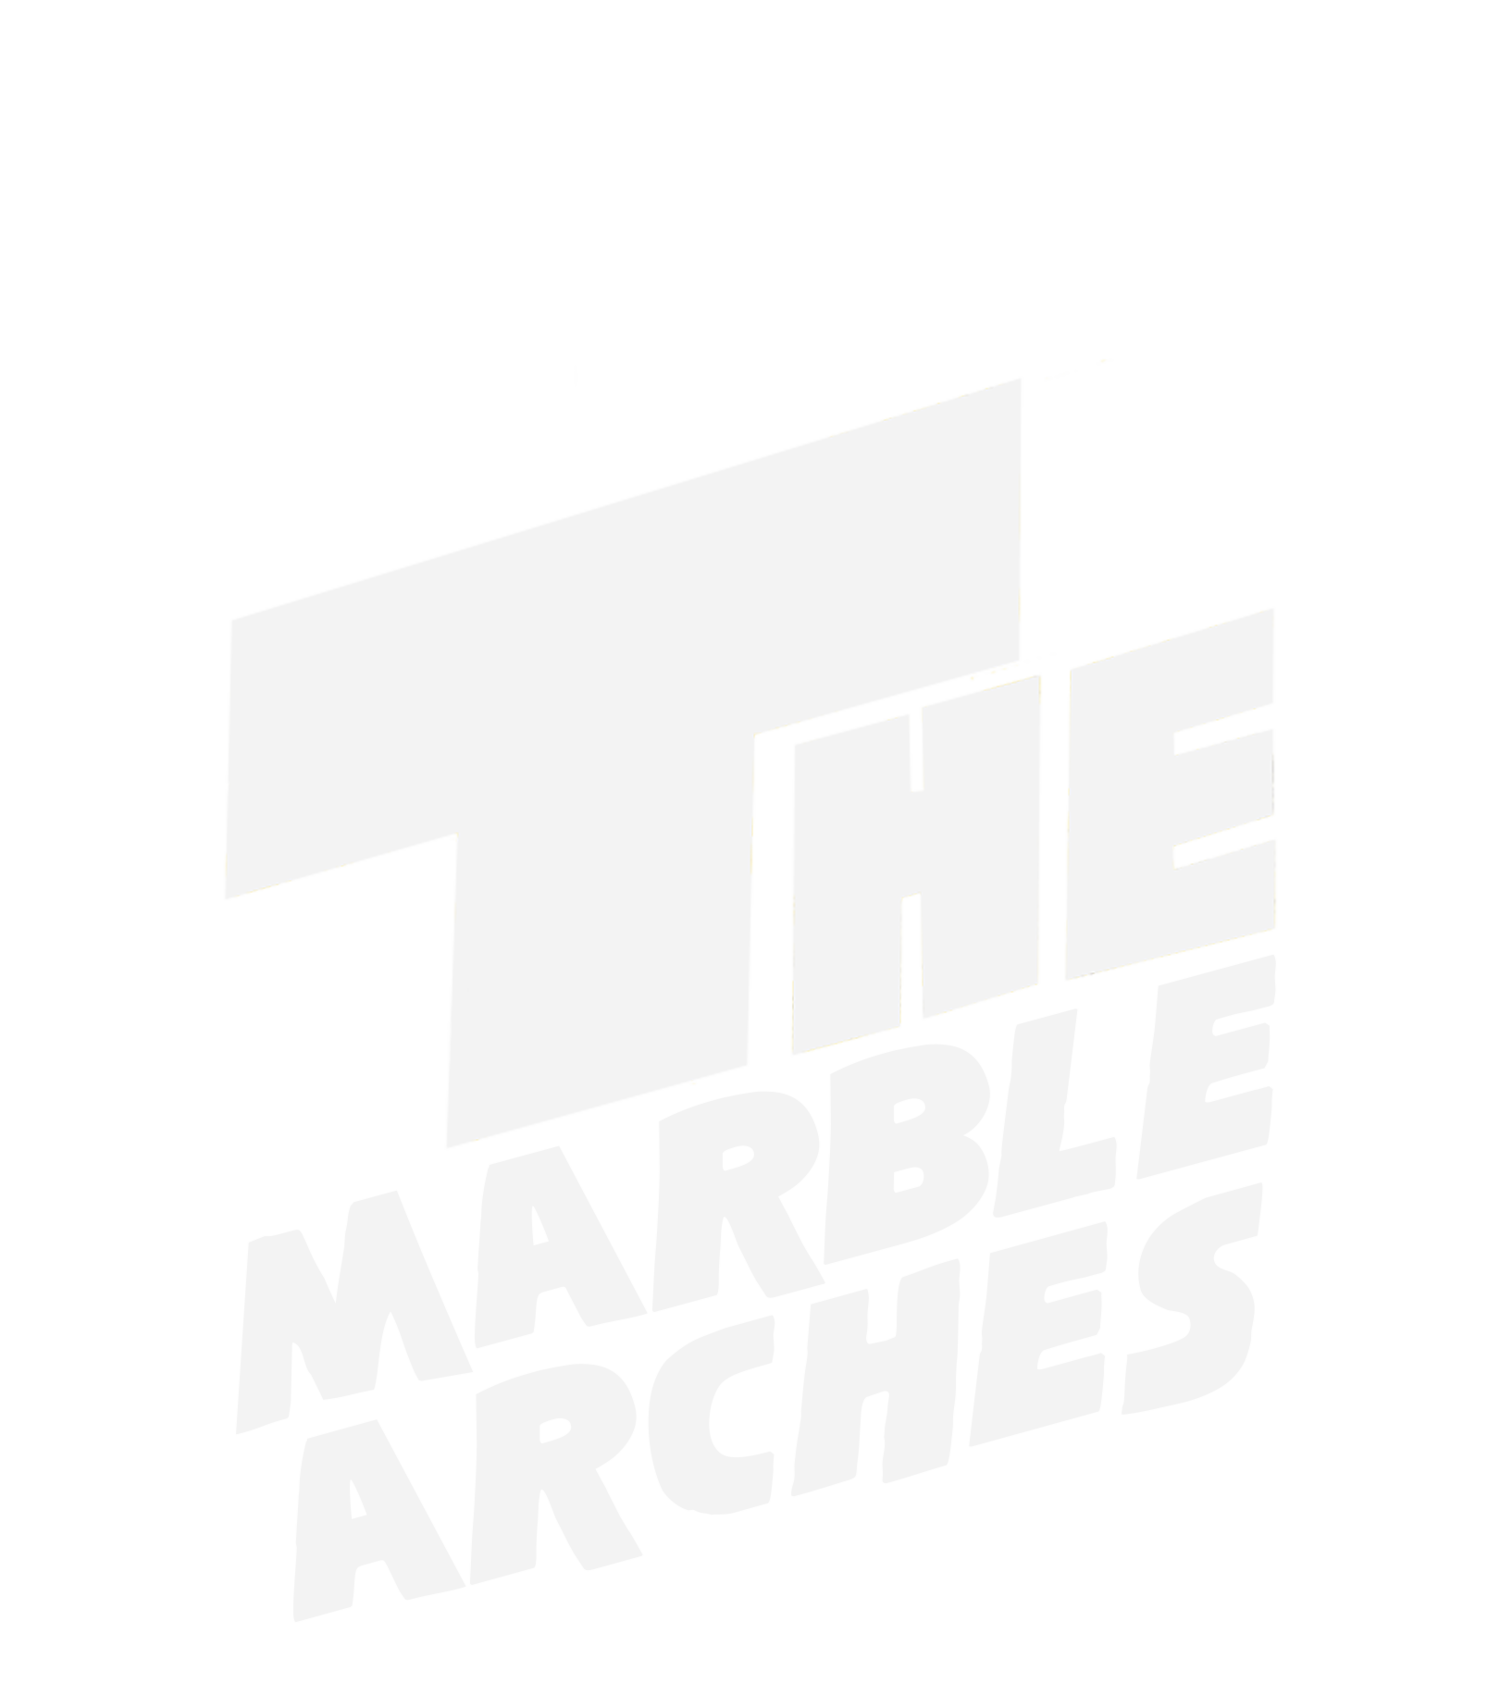 The Marble Arches